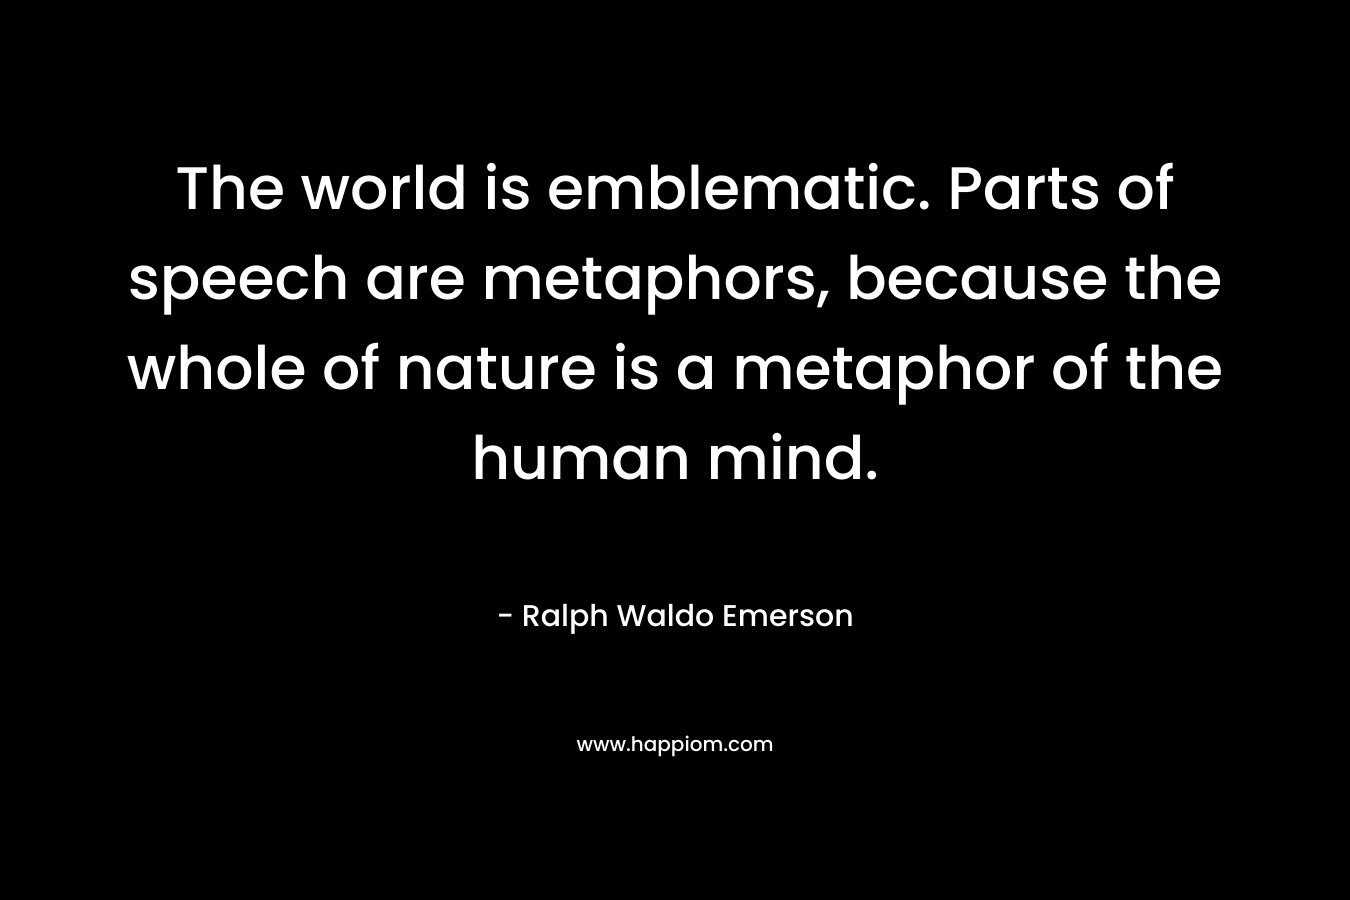 The world is emblematic. Parts of speech are metaphors, because the whole of nature is a metaphor of the human mind. – Ralph Waldo Emerson